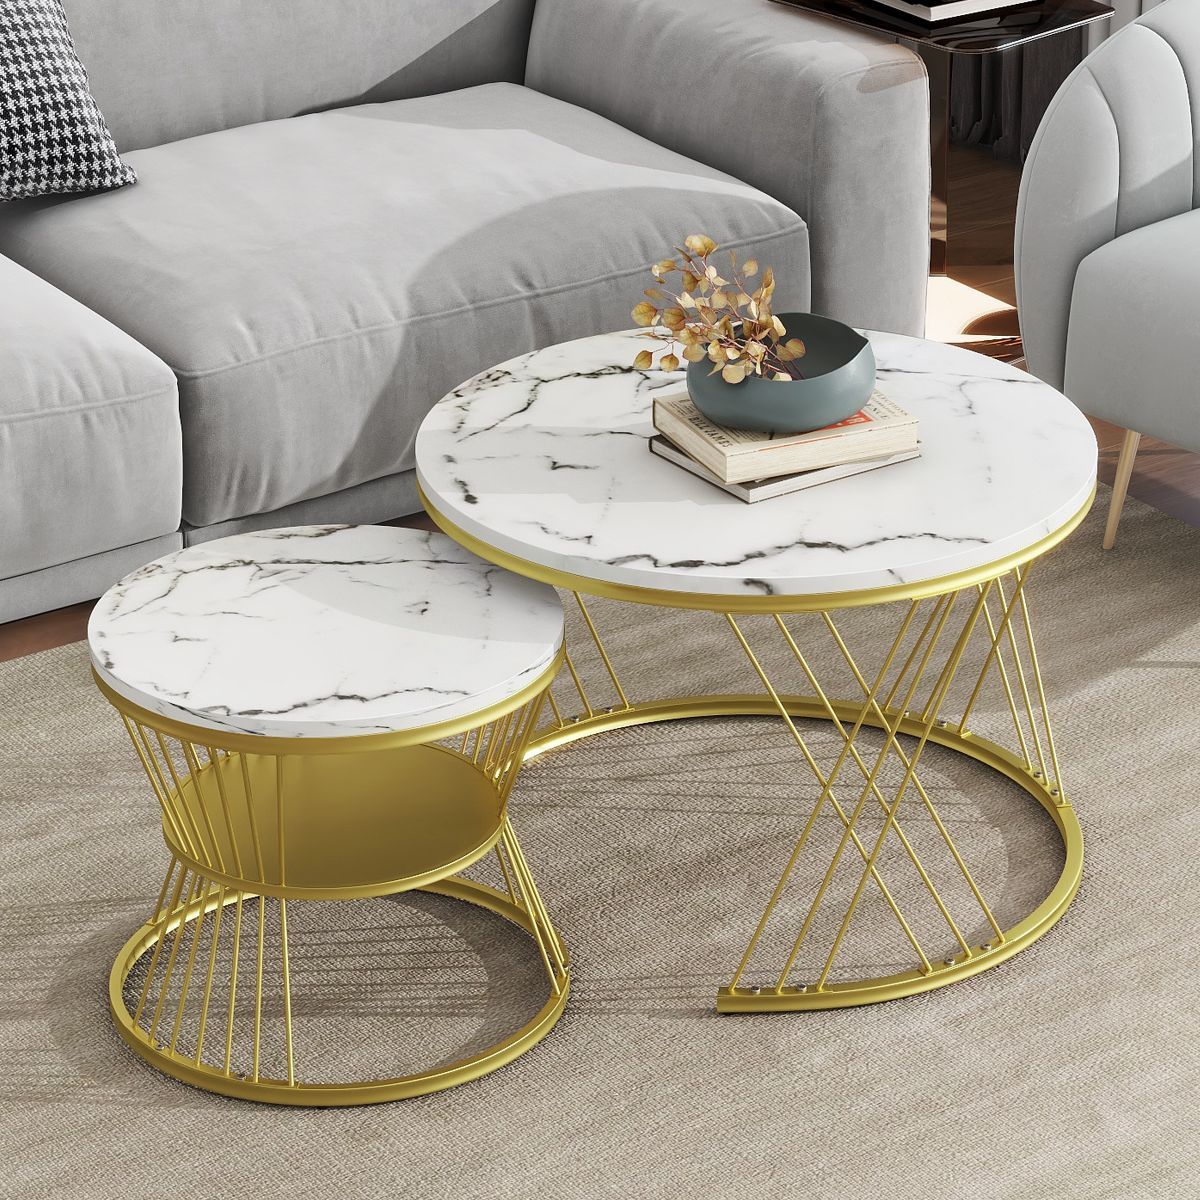 Set of 2 Nesting Coffee Table with Marble Grain Table Top, Golden Iron Frame Round Coffee Table, ... | Target